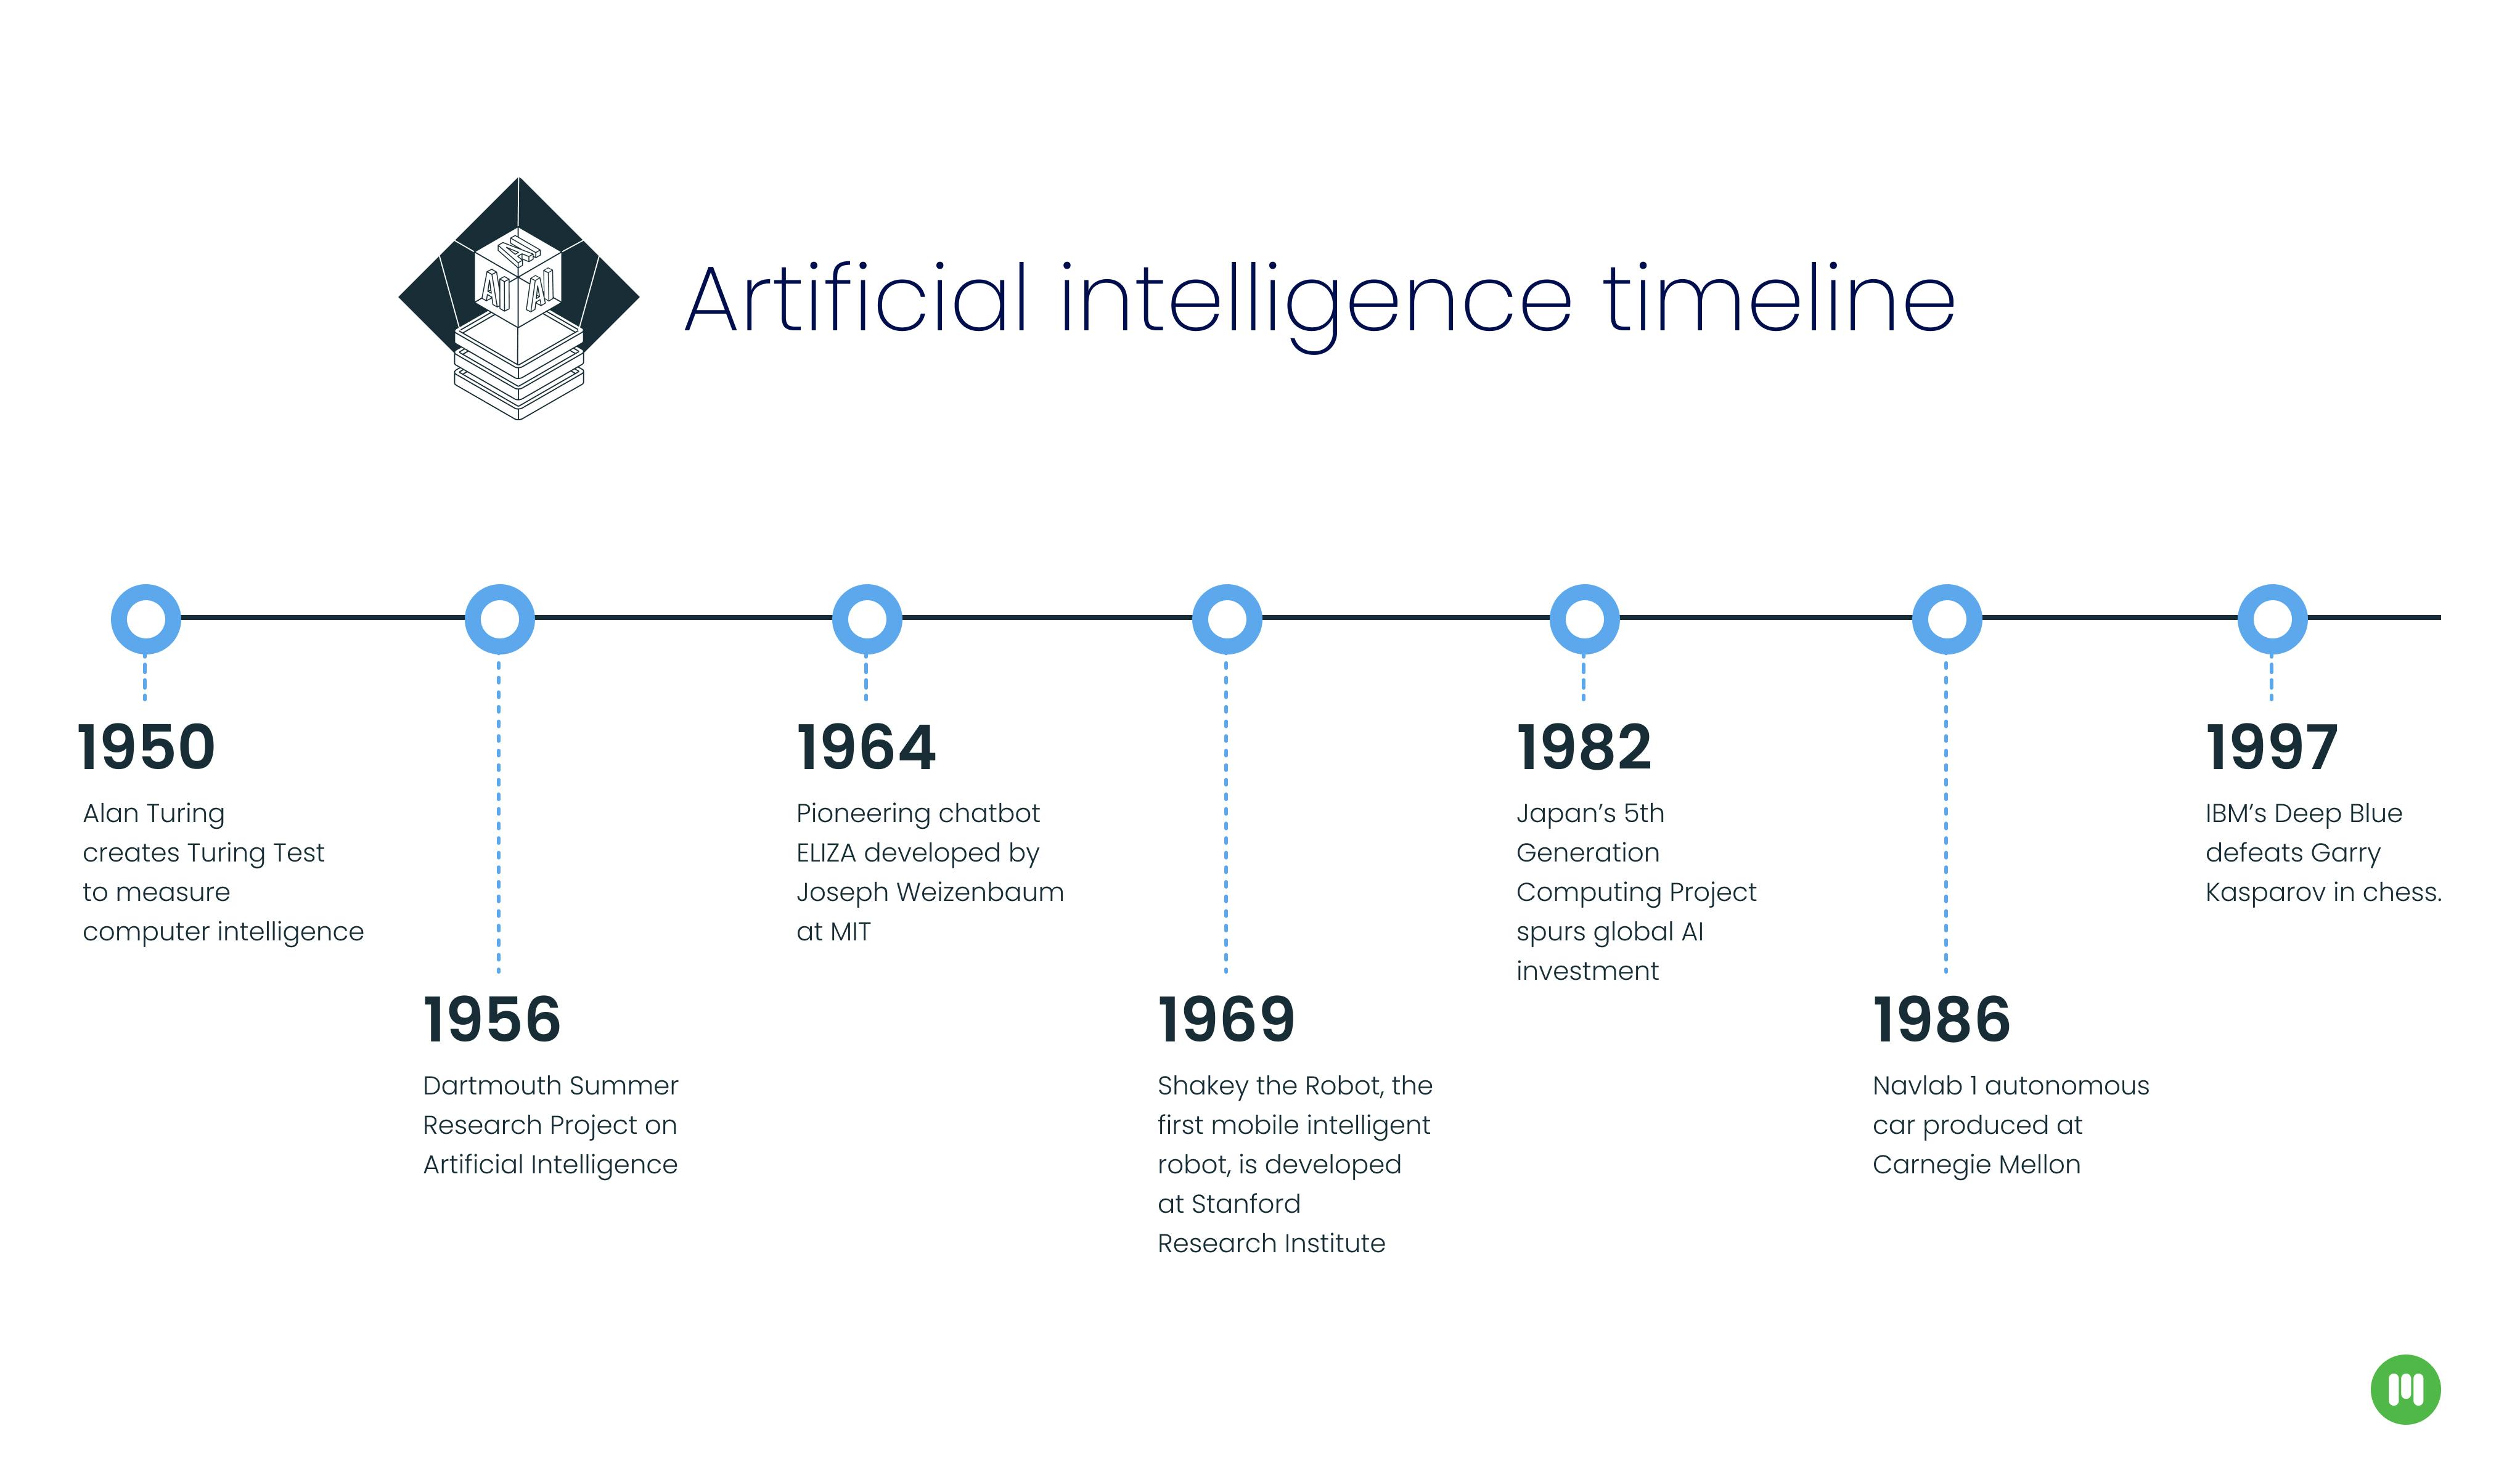 Artificial intelligence timeline from 1950 to 1997